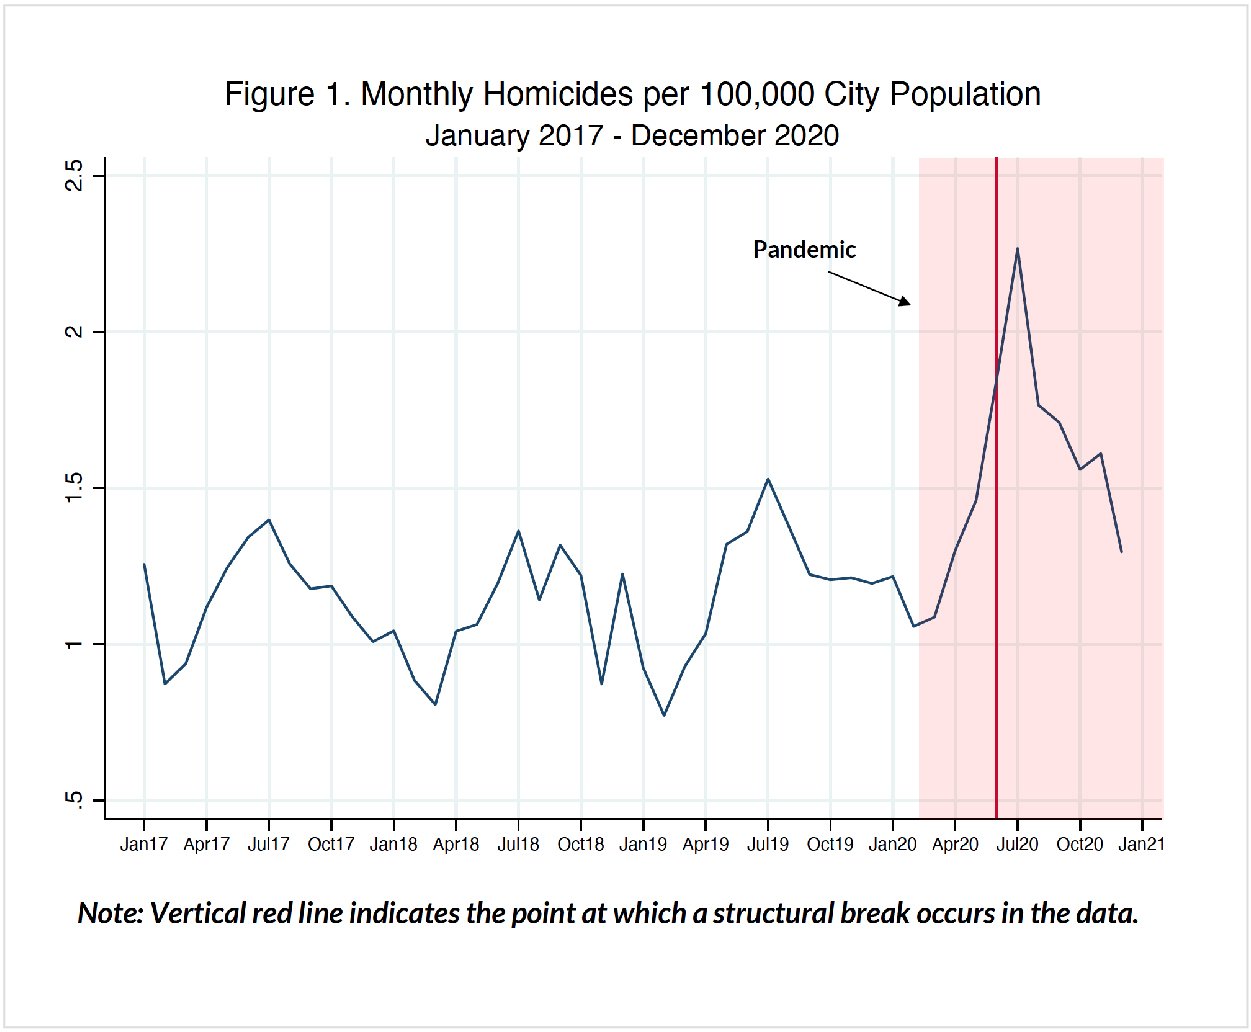 GG GlobalDigest US Homicide On The Rise Charts 02 ?width=1880&name=GG GlobalDigest US Homicide On The Rise Charts 02 